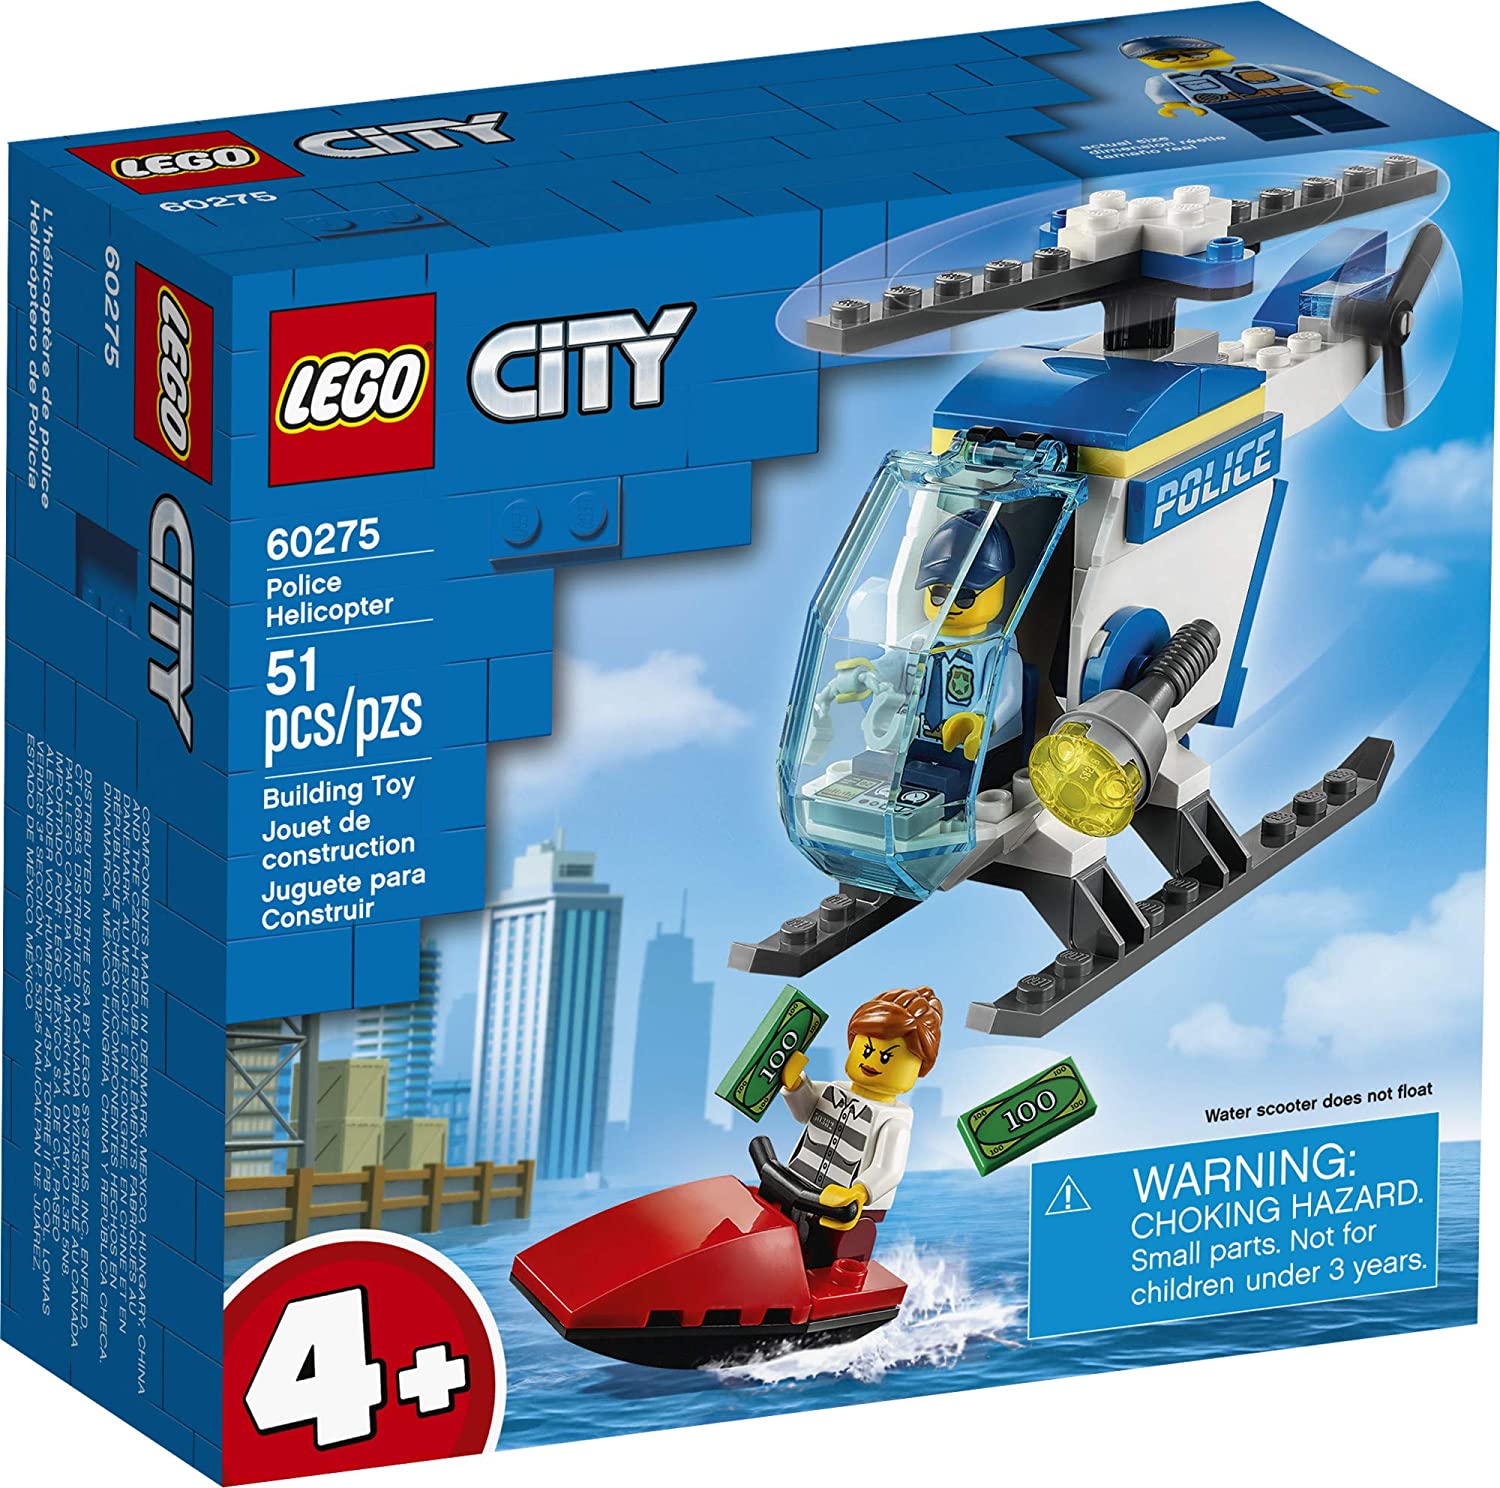 City Lego Helicopter – Awesome Gifts